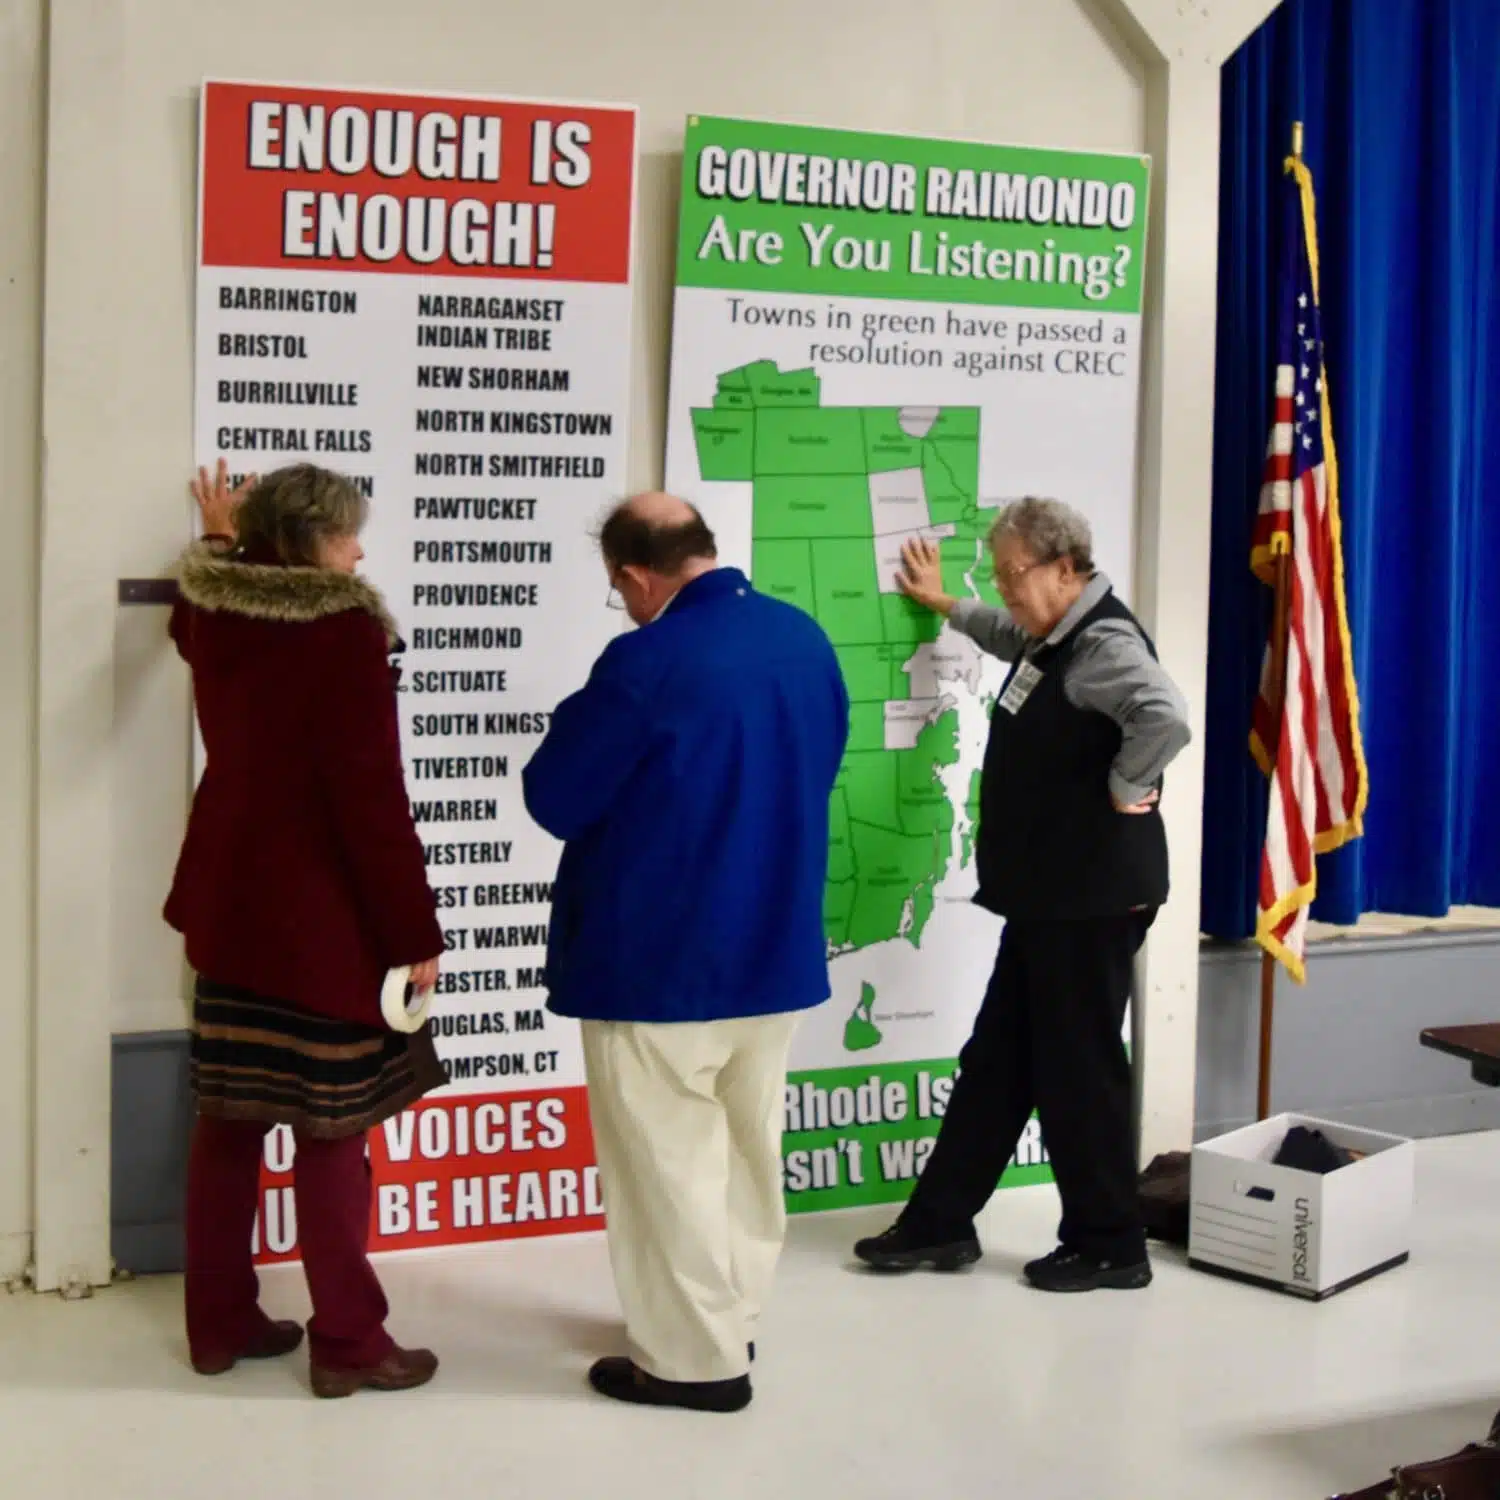 Scituate is withdrawing their opposition to Invenergy and their support for Burrillville